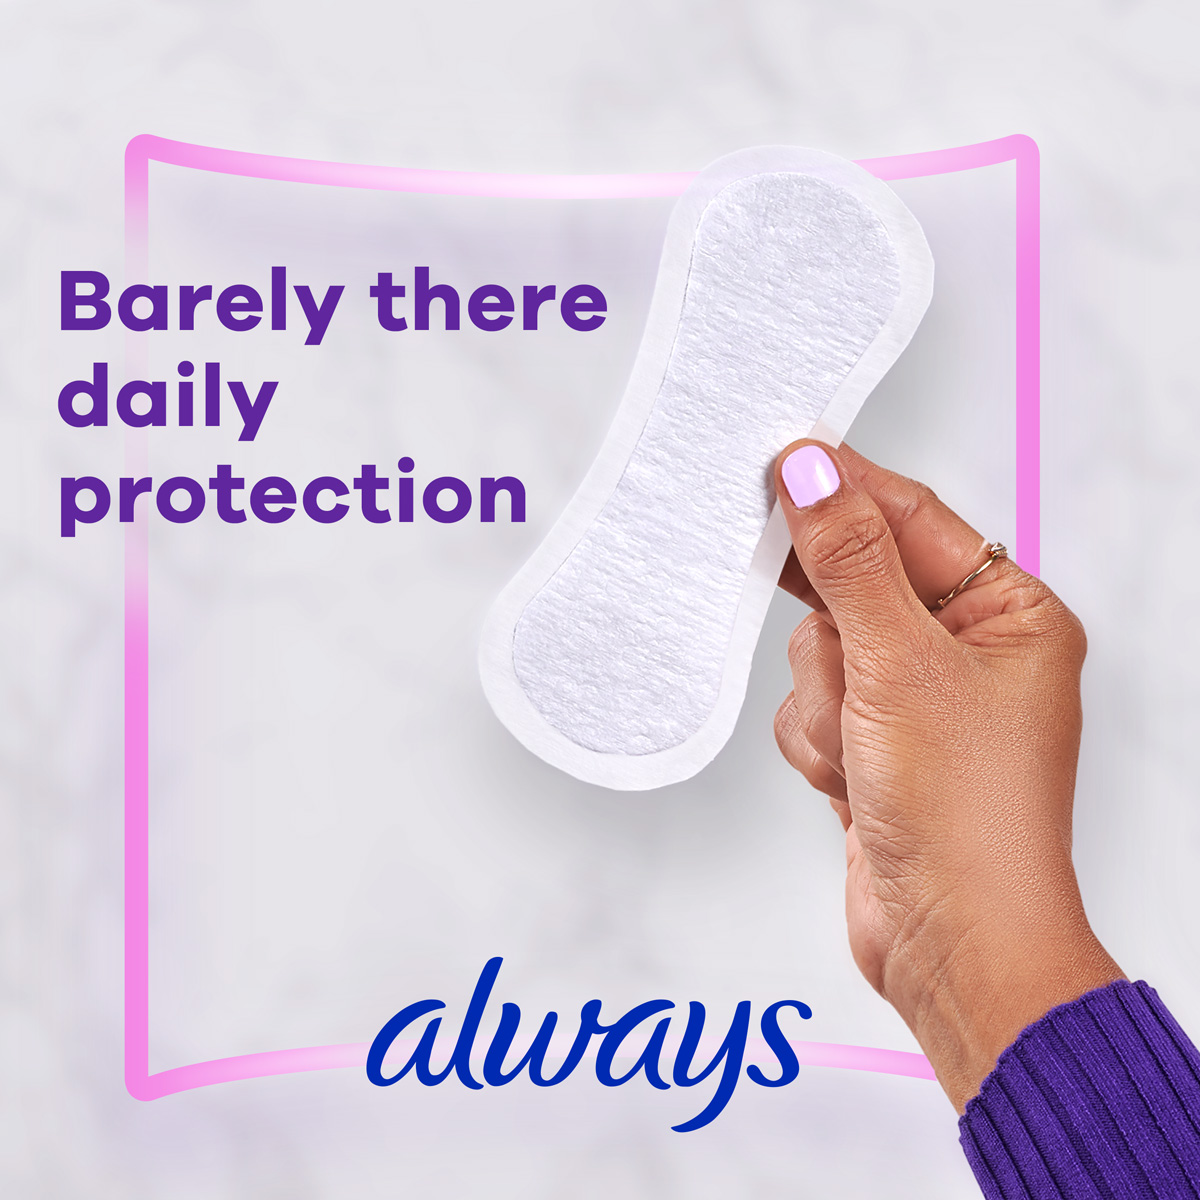 Barely there daily protection